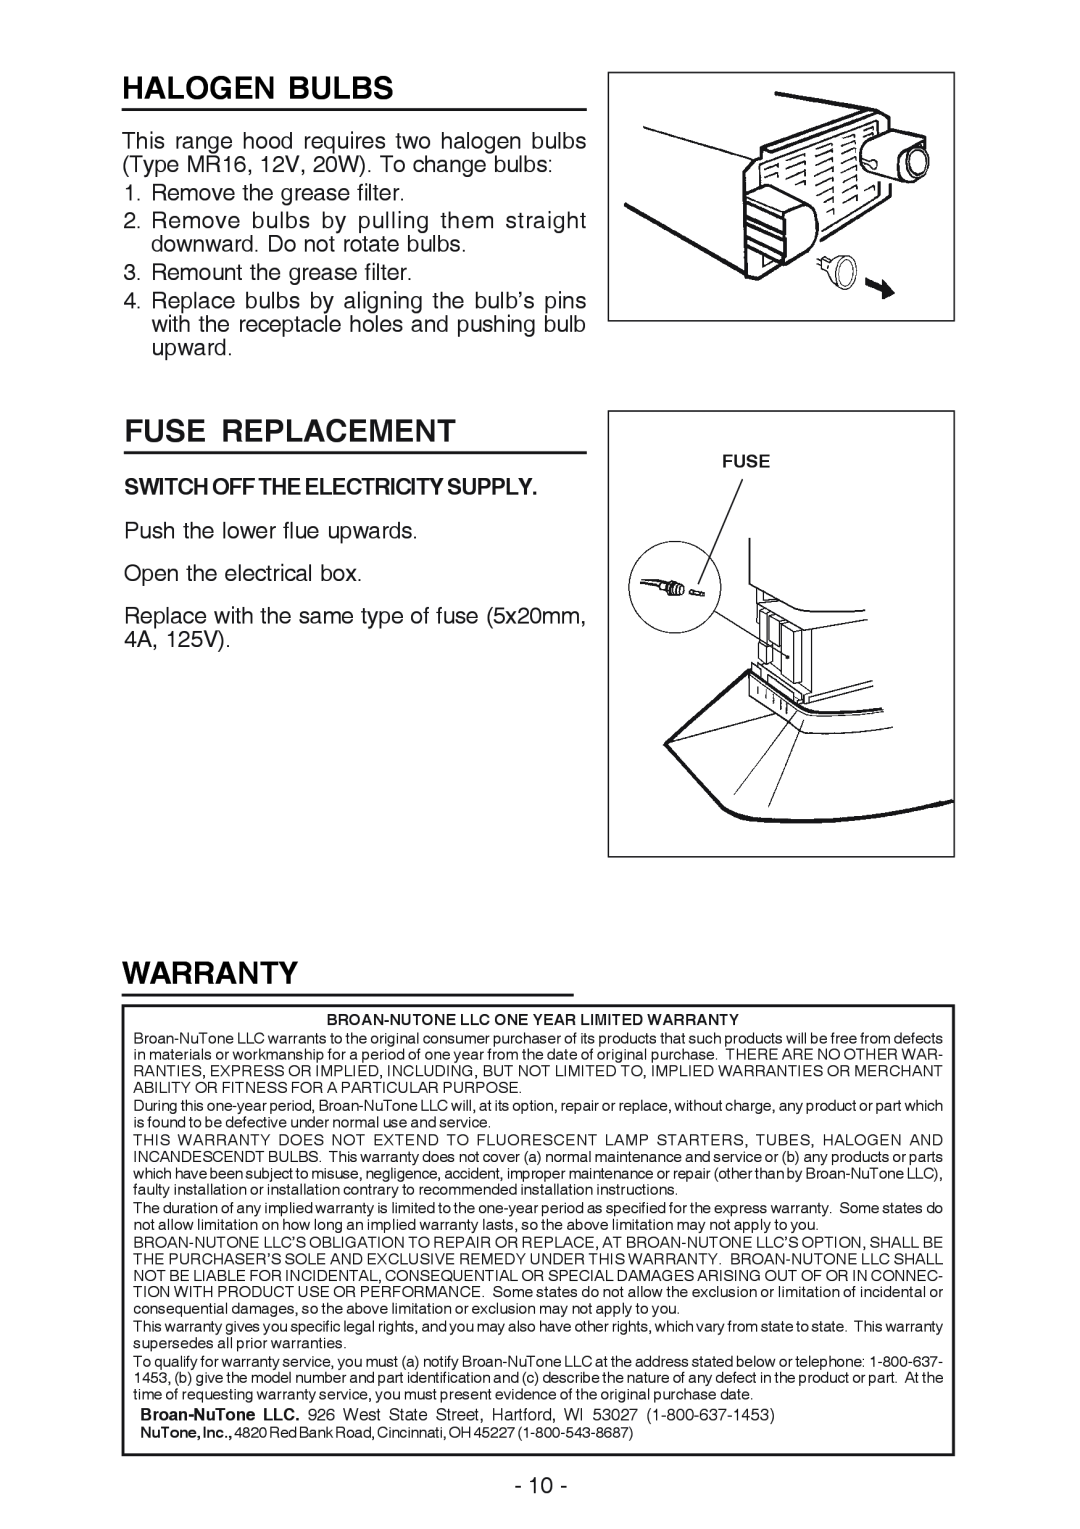 NuTone NP629004 manual Halogen Bulbs, Fuse Replacement, Warranty, Broan-NuTone LLC. 926 West State Street, Hartford, WI 